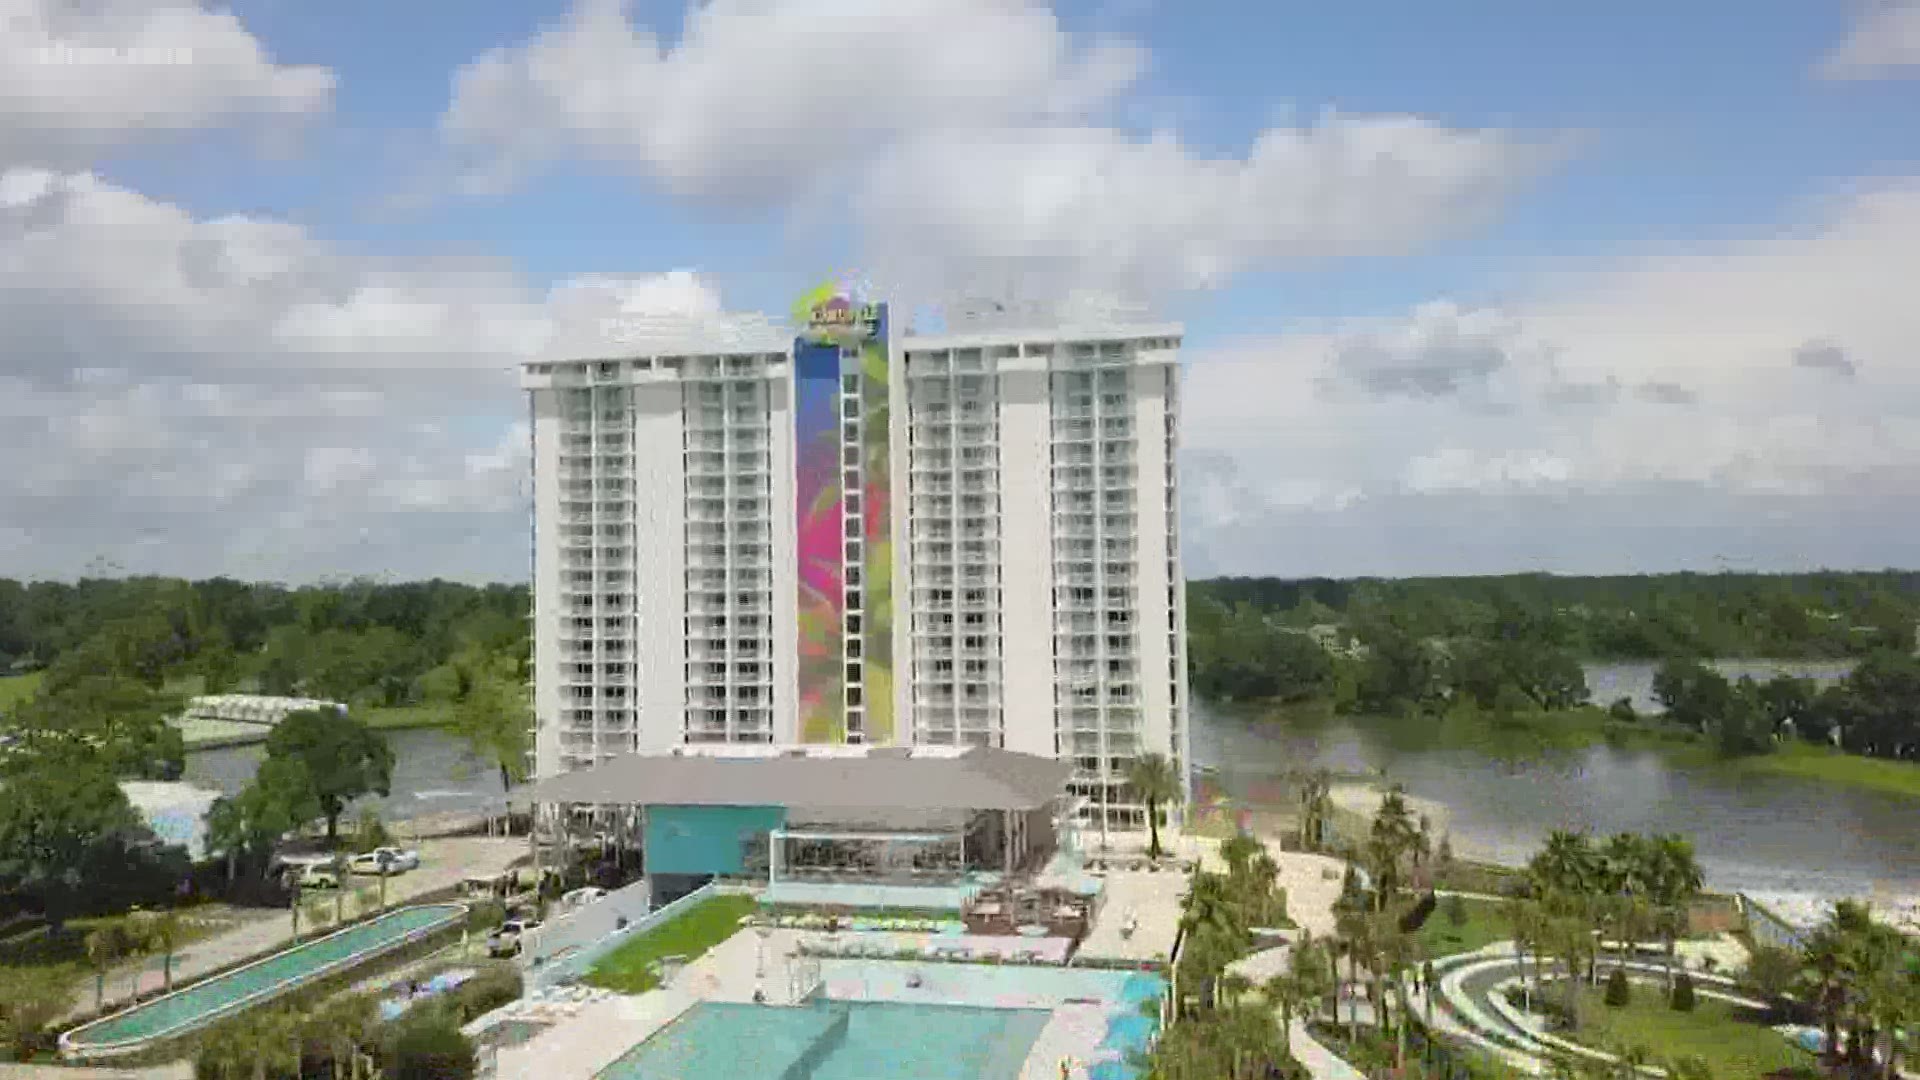 The brand-new Margaritaville Lake Resort is just weeks away from opening in Lake Conroe. They're giving KHOU 11 an exclusive sneak peek!